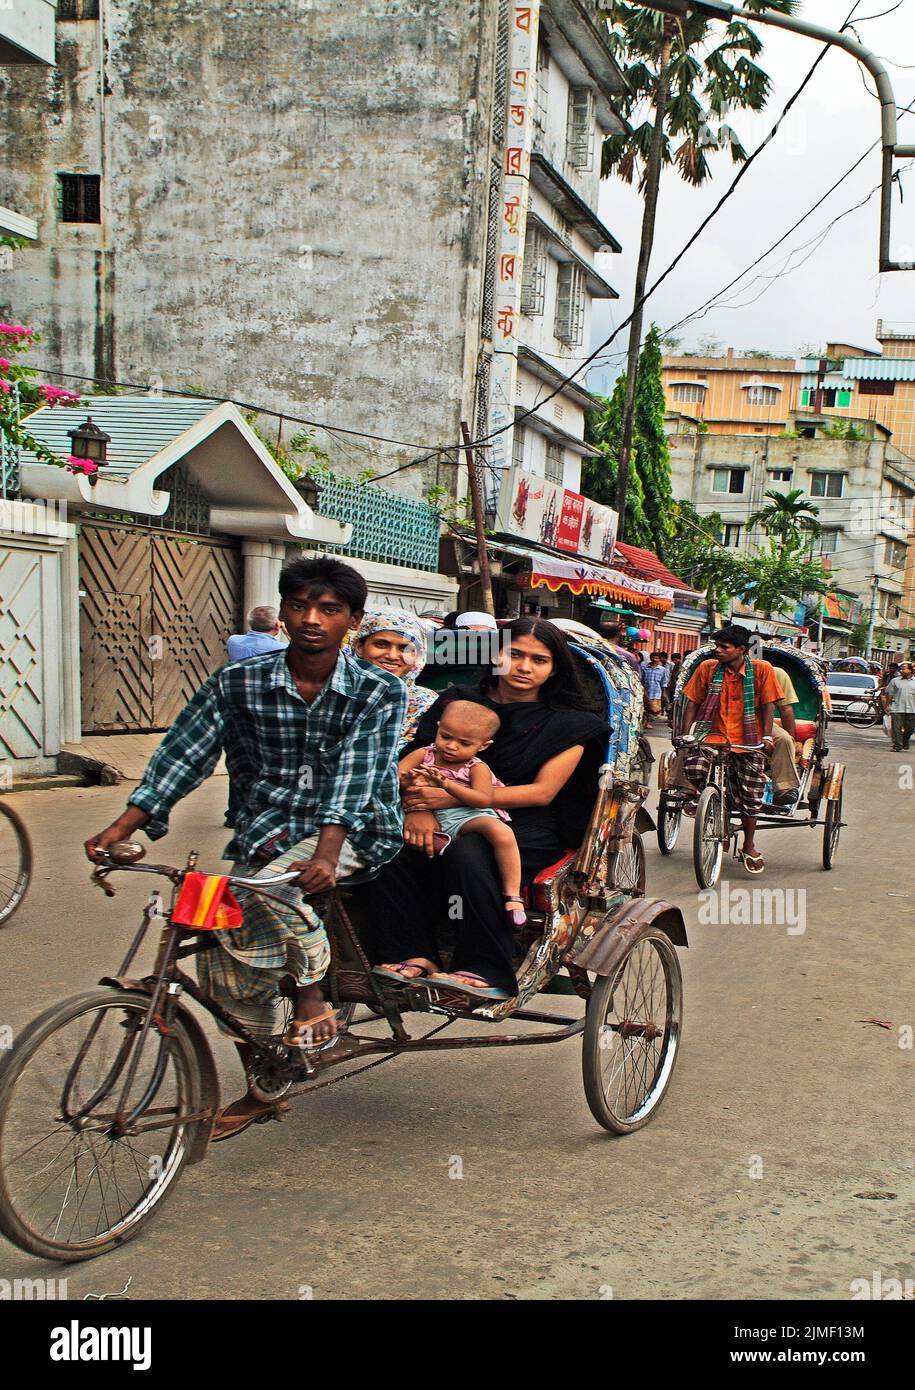 Dhaka, Bangladesh - September 17, 2007: Unidentified people in traditional cycle rickshaw, an usual mode of transport Stock Photo